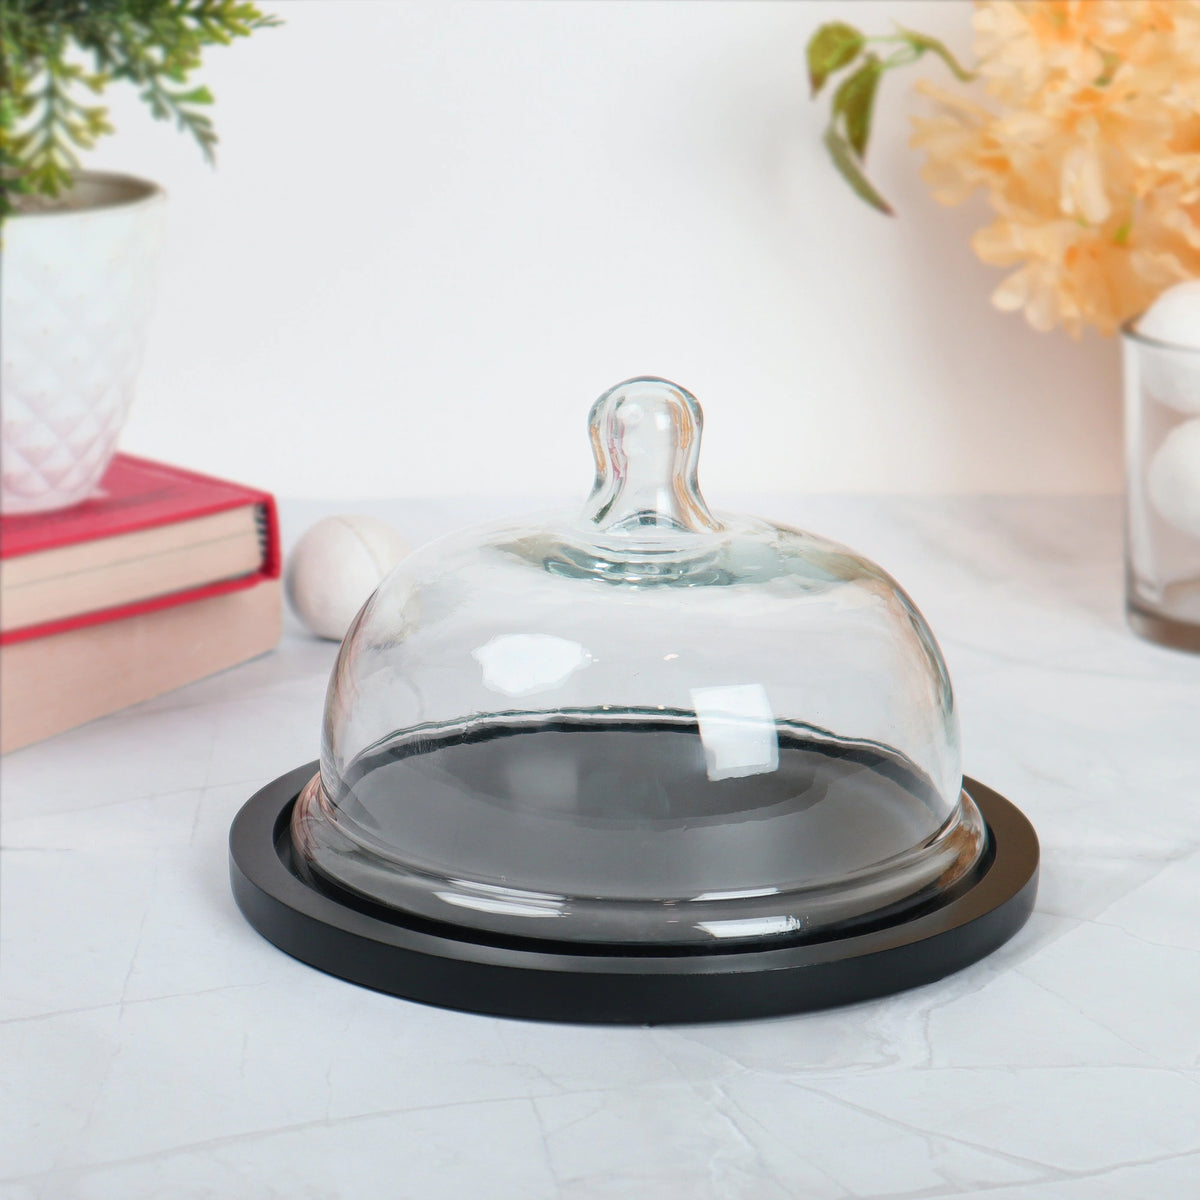 Wooden Cake Stand with Cloche/Dome